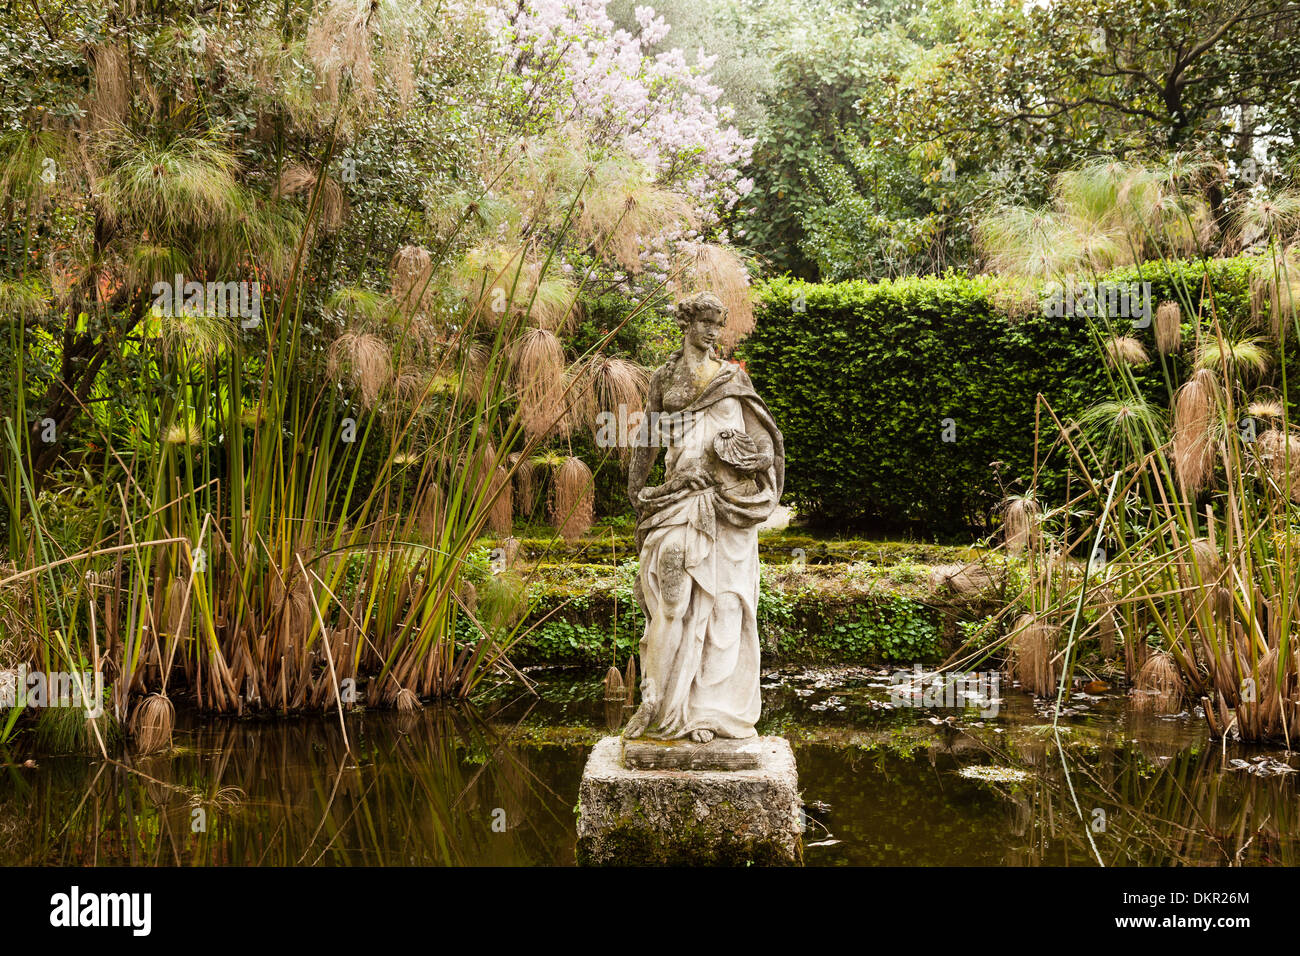 France, Menton, Serre de la Madone garden, nymph in the pond and Cyperus papyrus (use for press and book only) Stock Photo